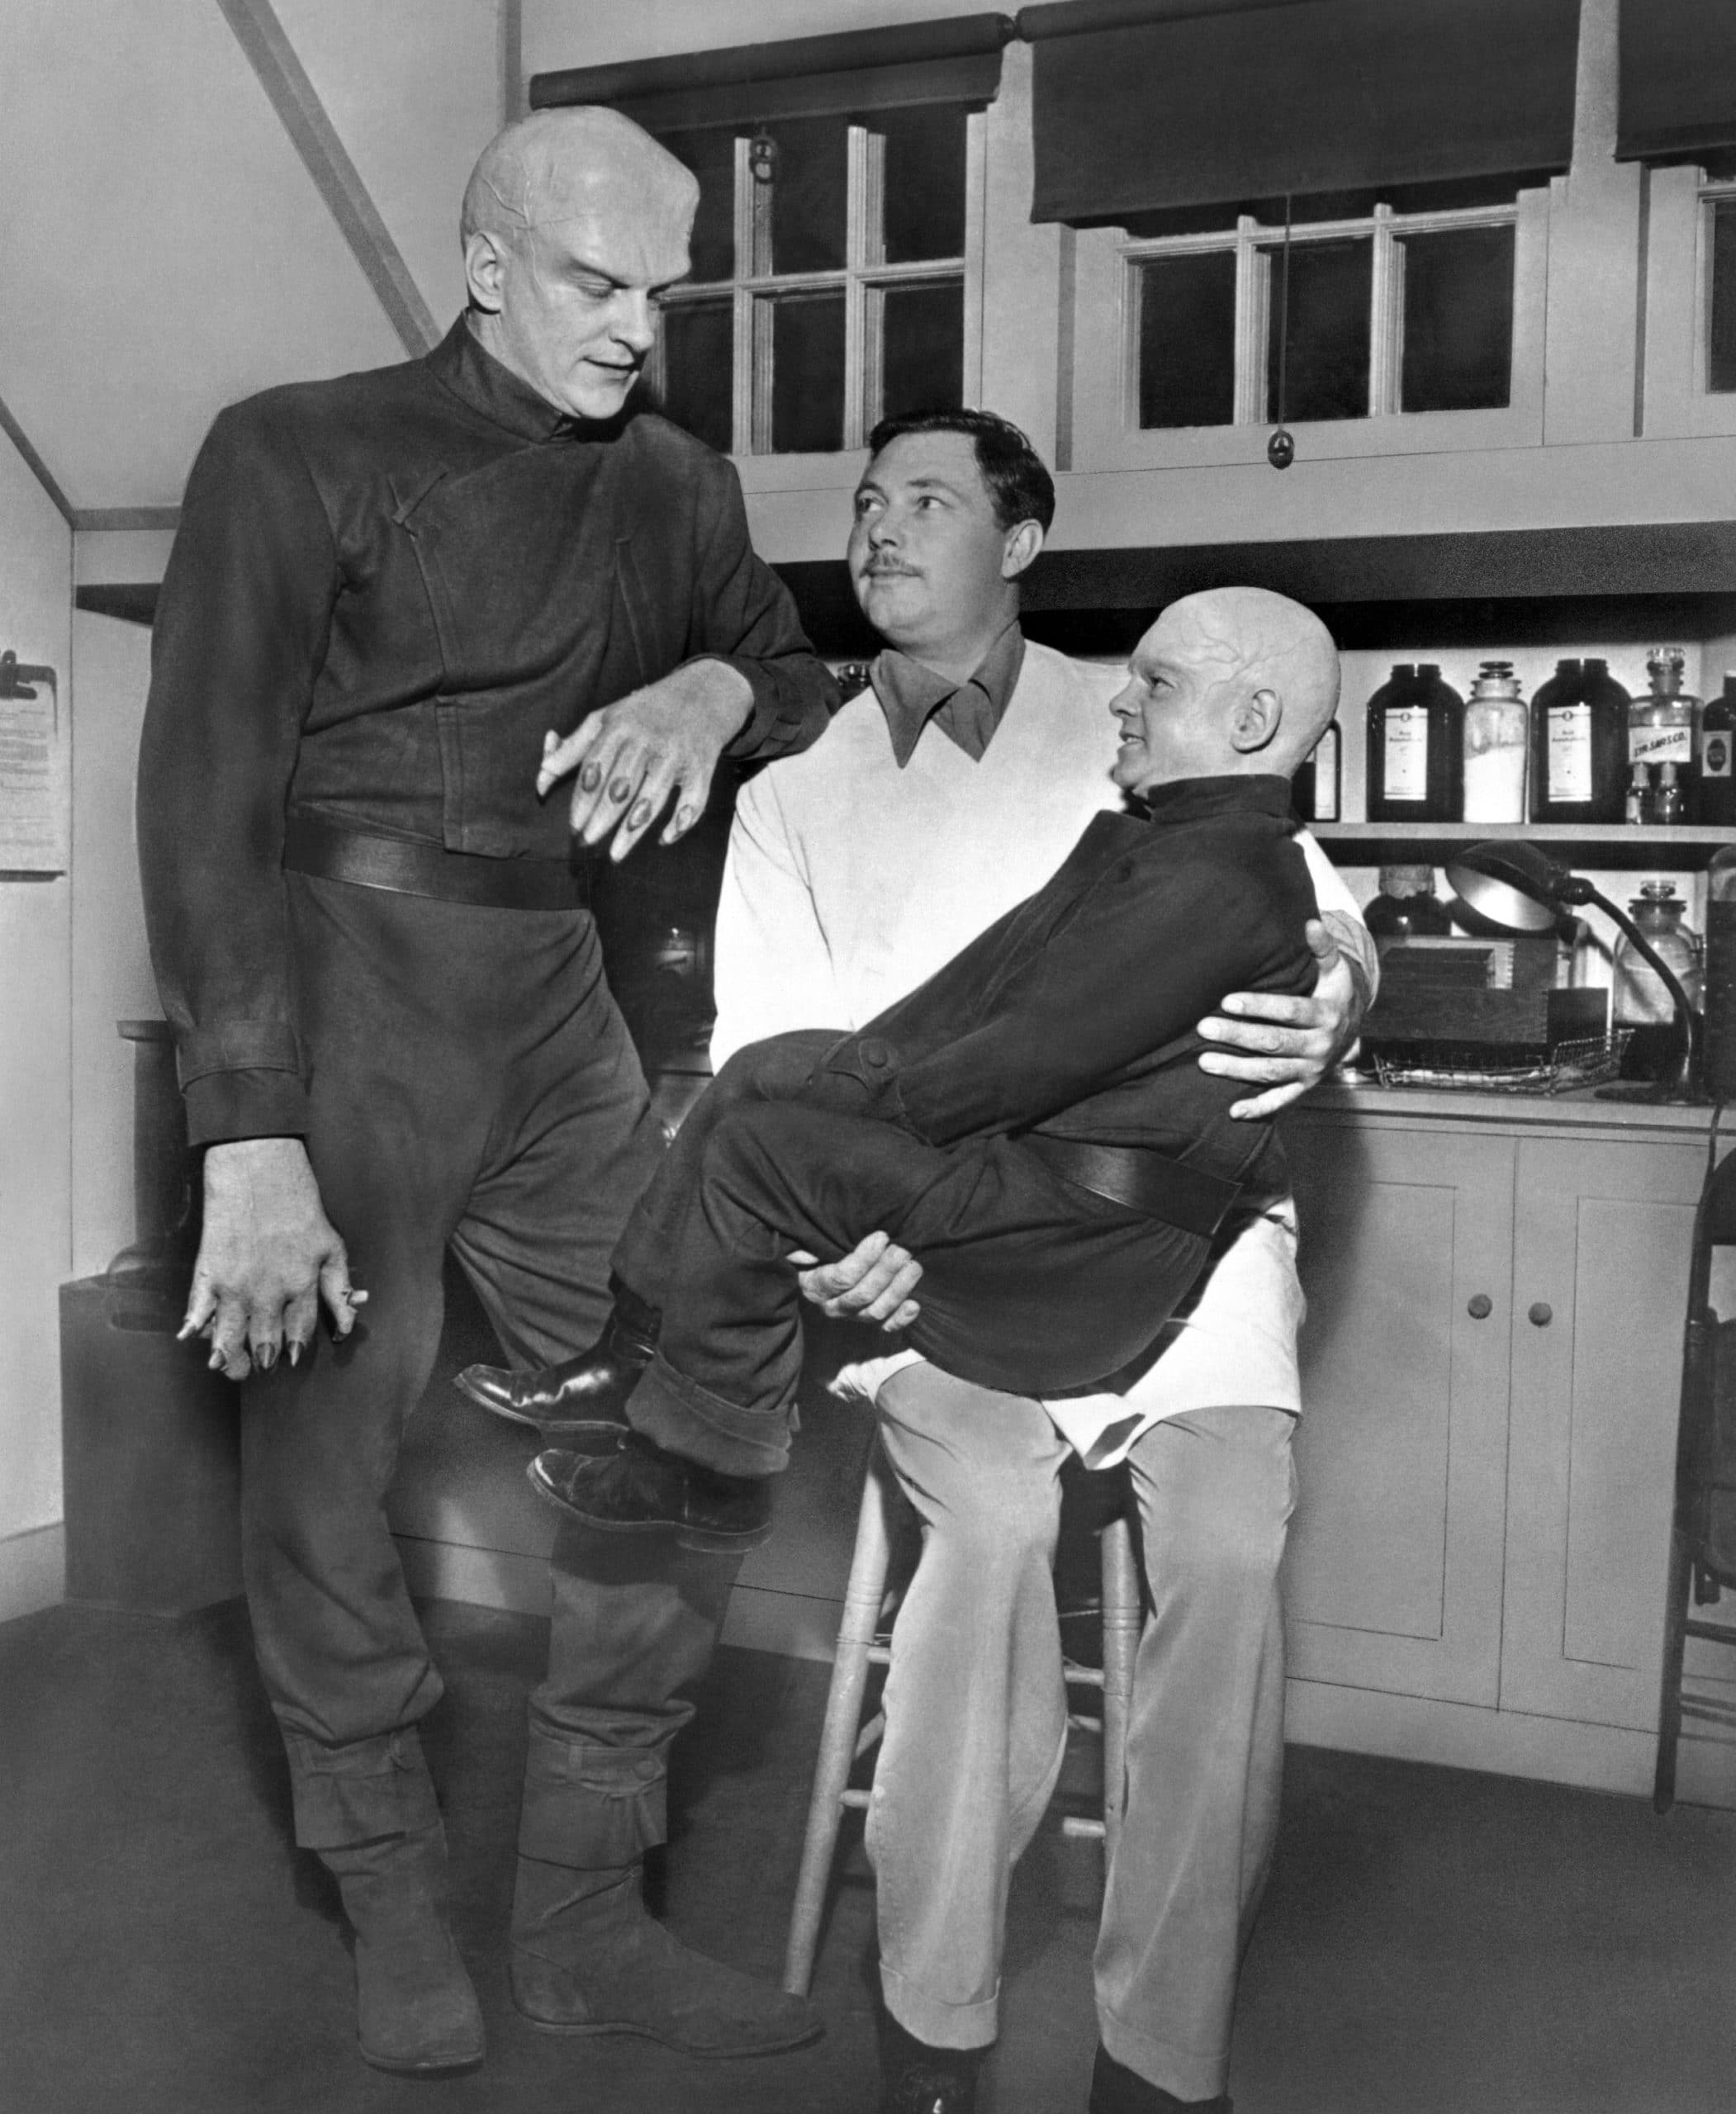 THE THING FROM ANOTHER WORLD, from left: James Arness, make-up artist Lee Greenway, Billy Curtis, on-set, 1951